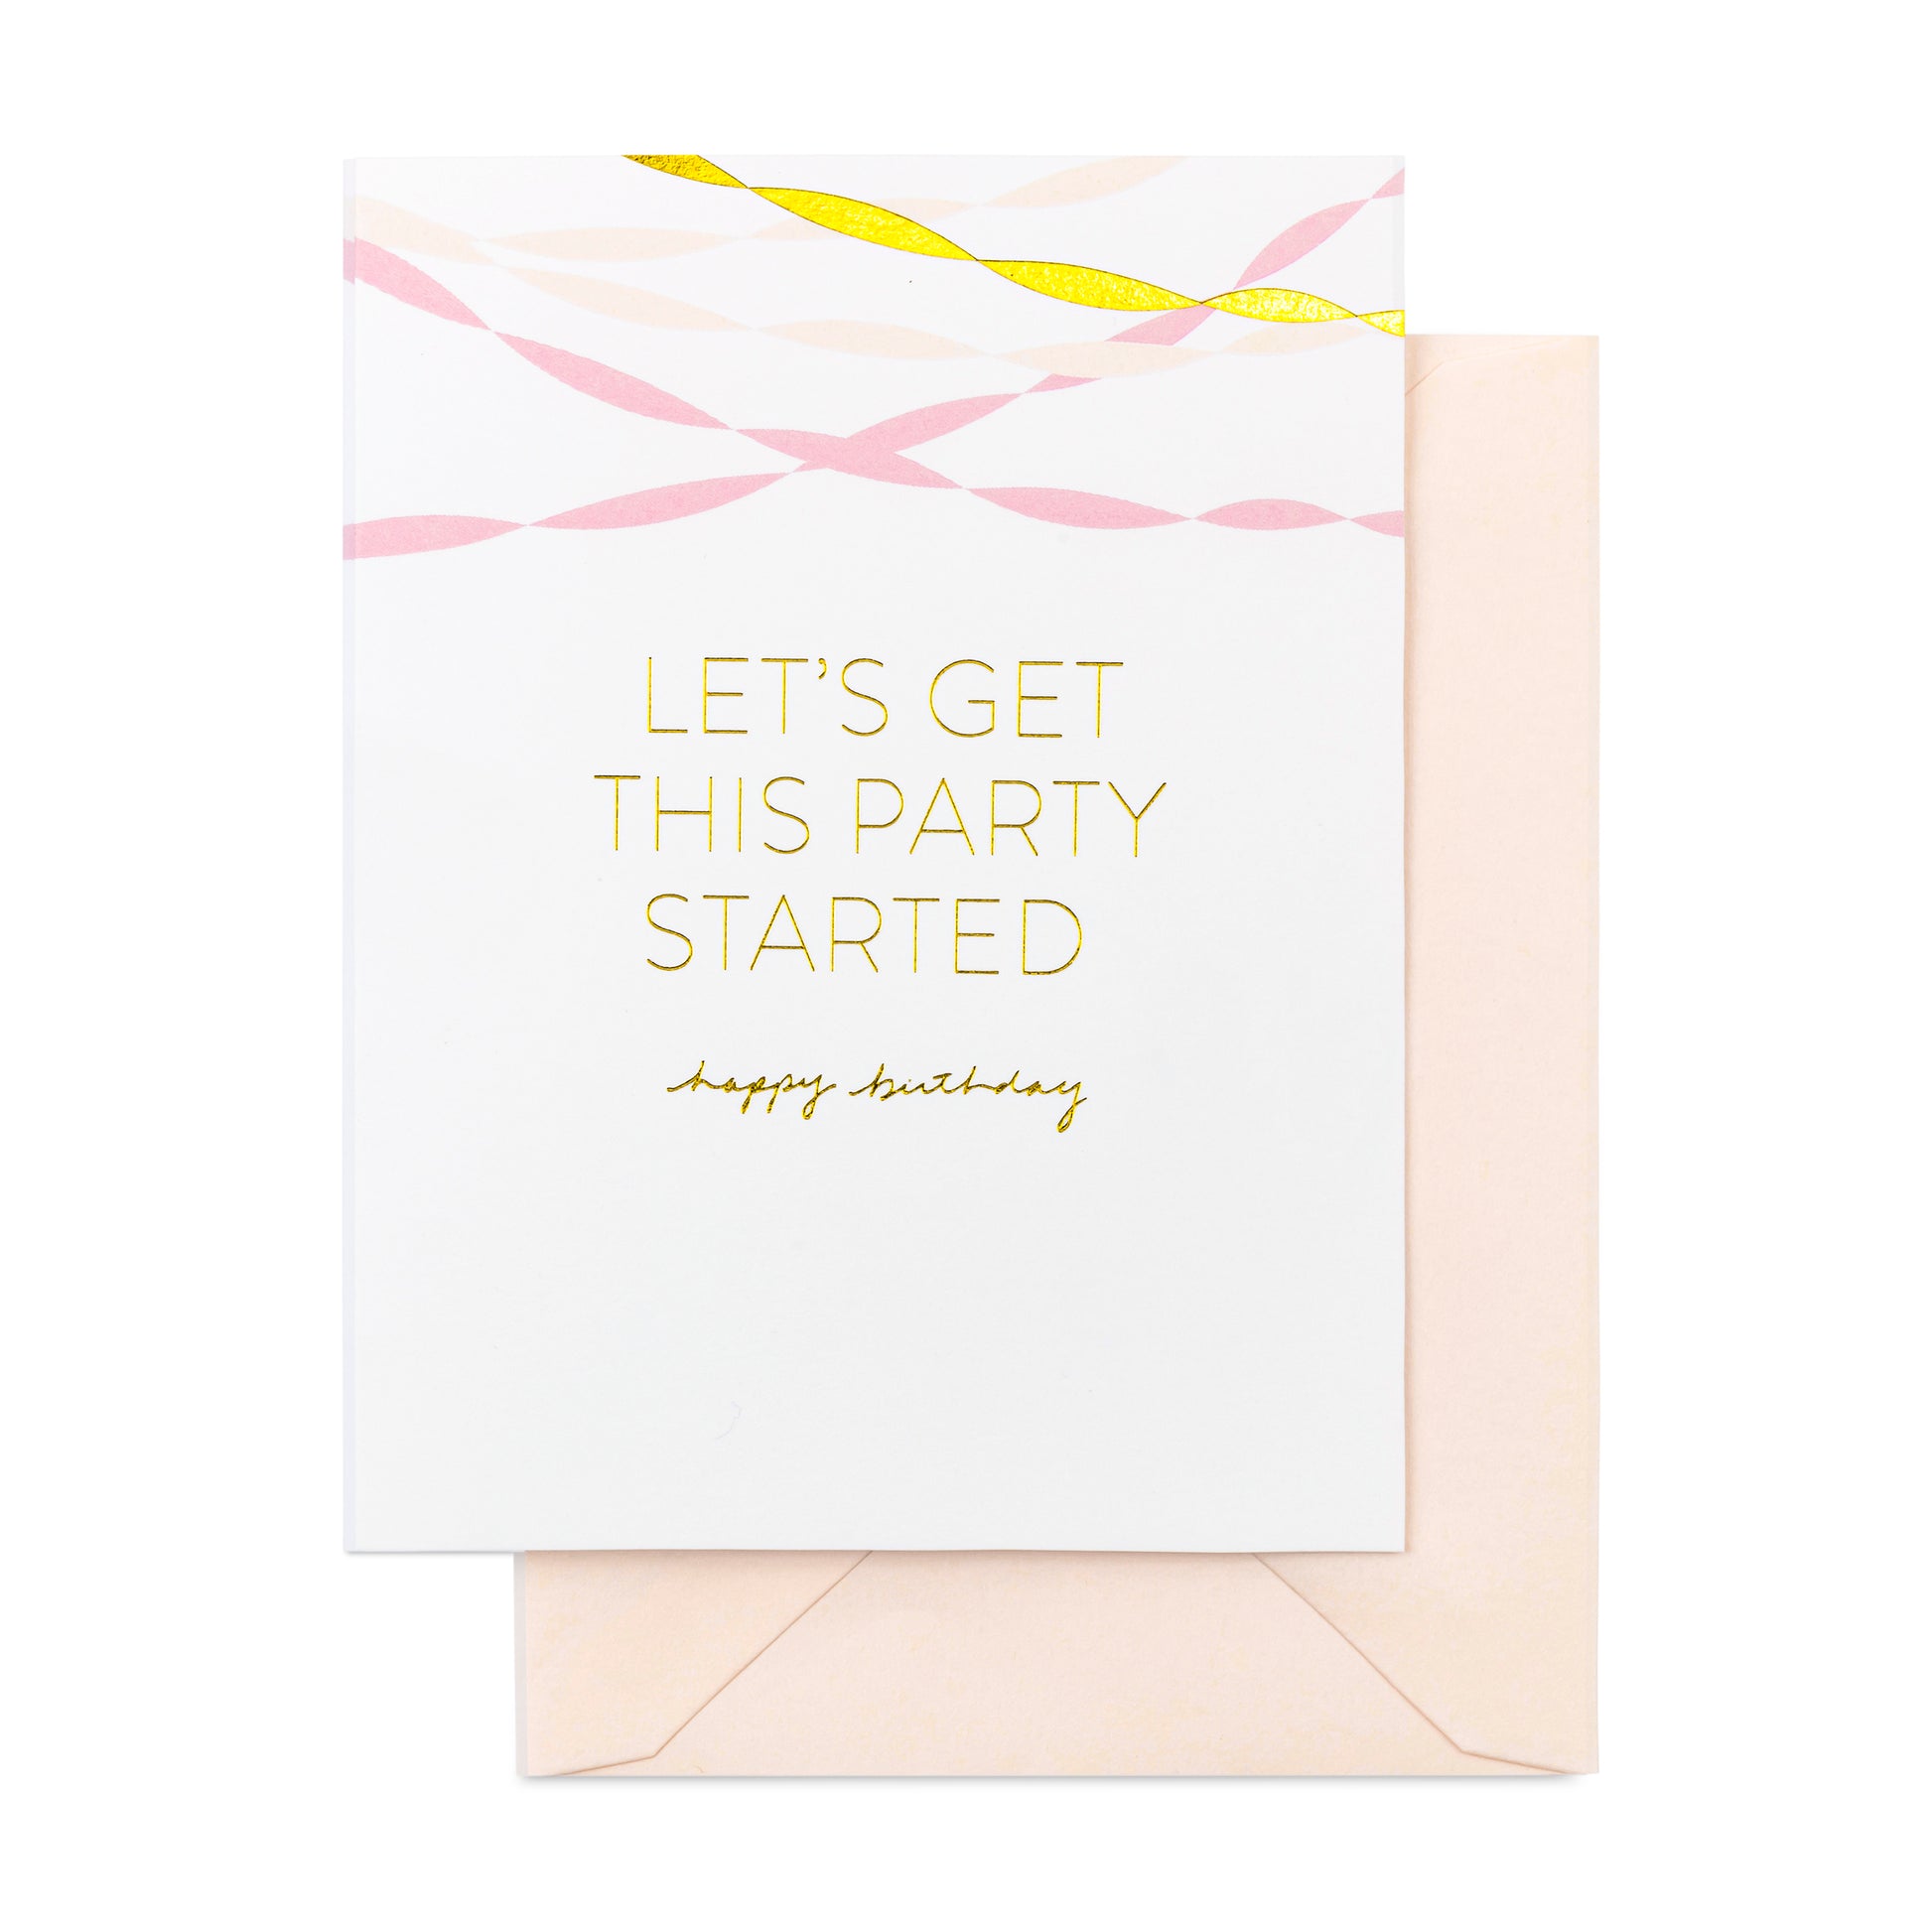 Pink and gold streamer birthday card printed with Let's Get This Party Started